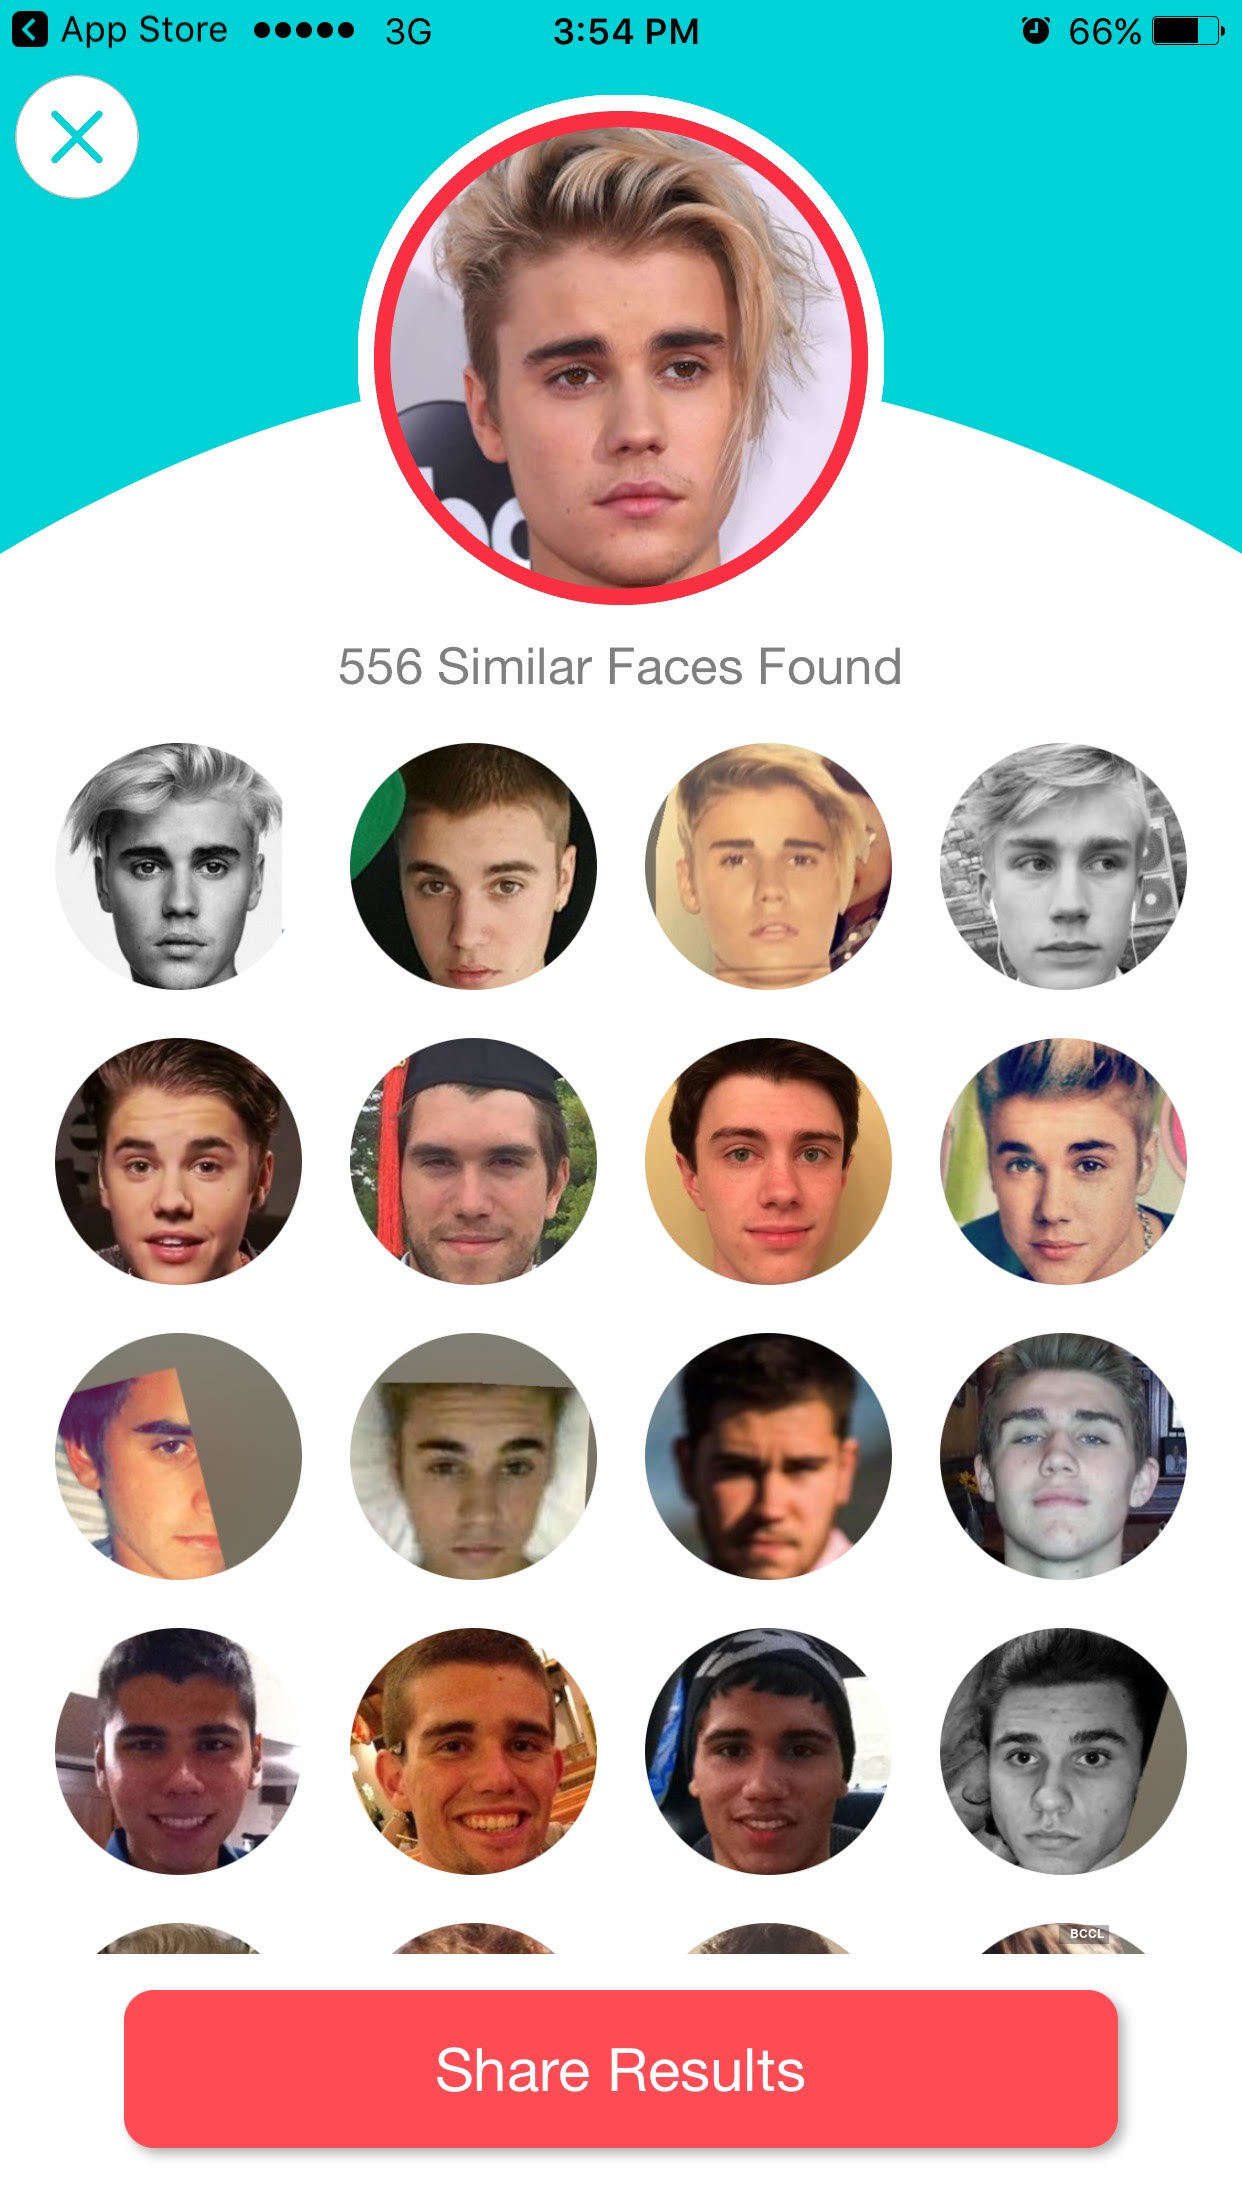 Dating app lets you match with celebrity lookalikes!